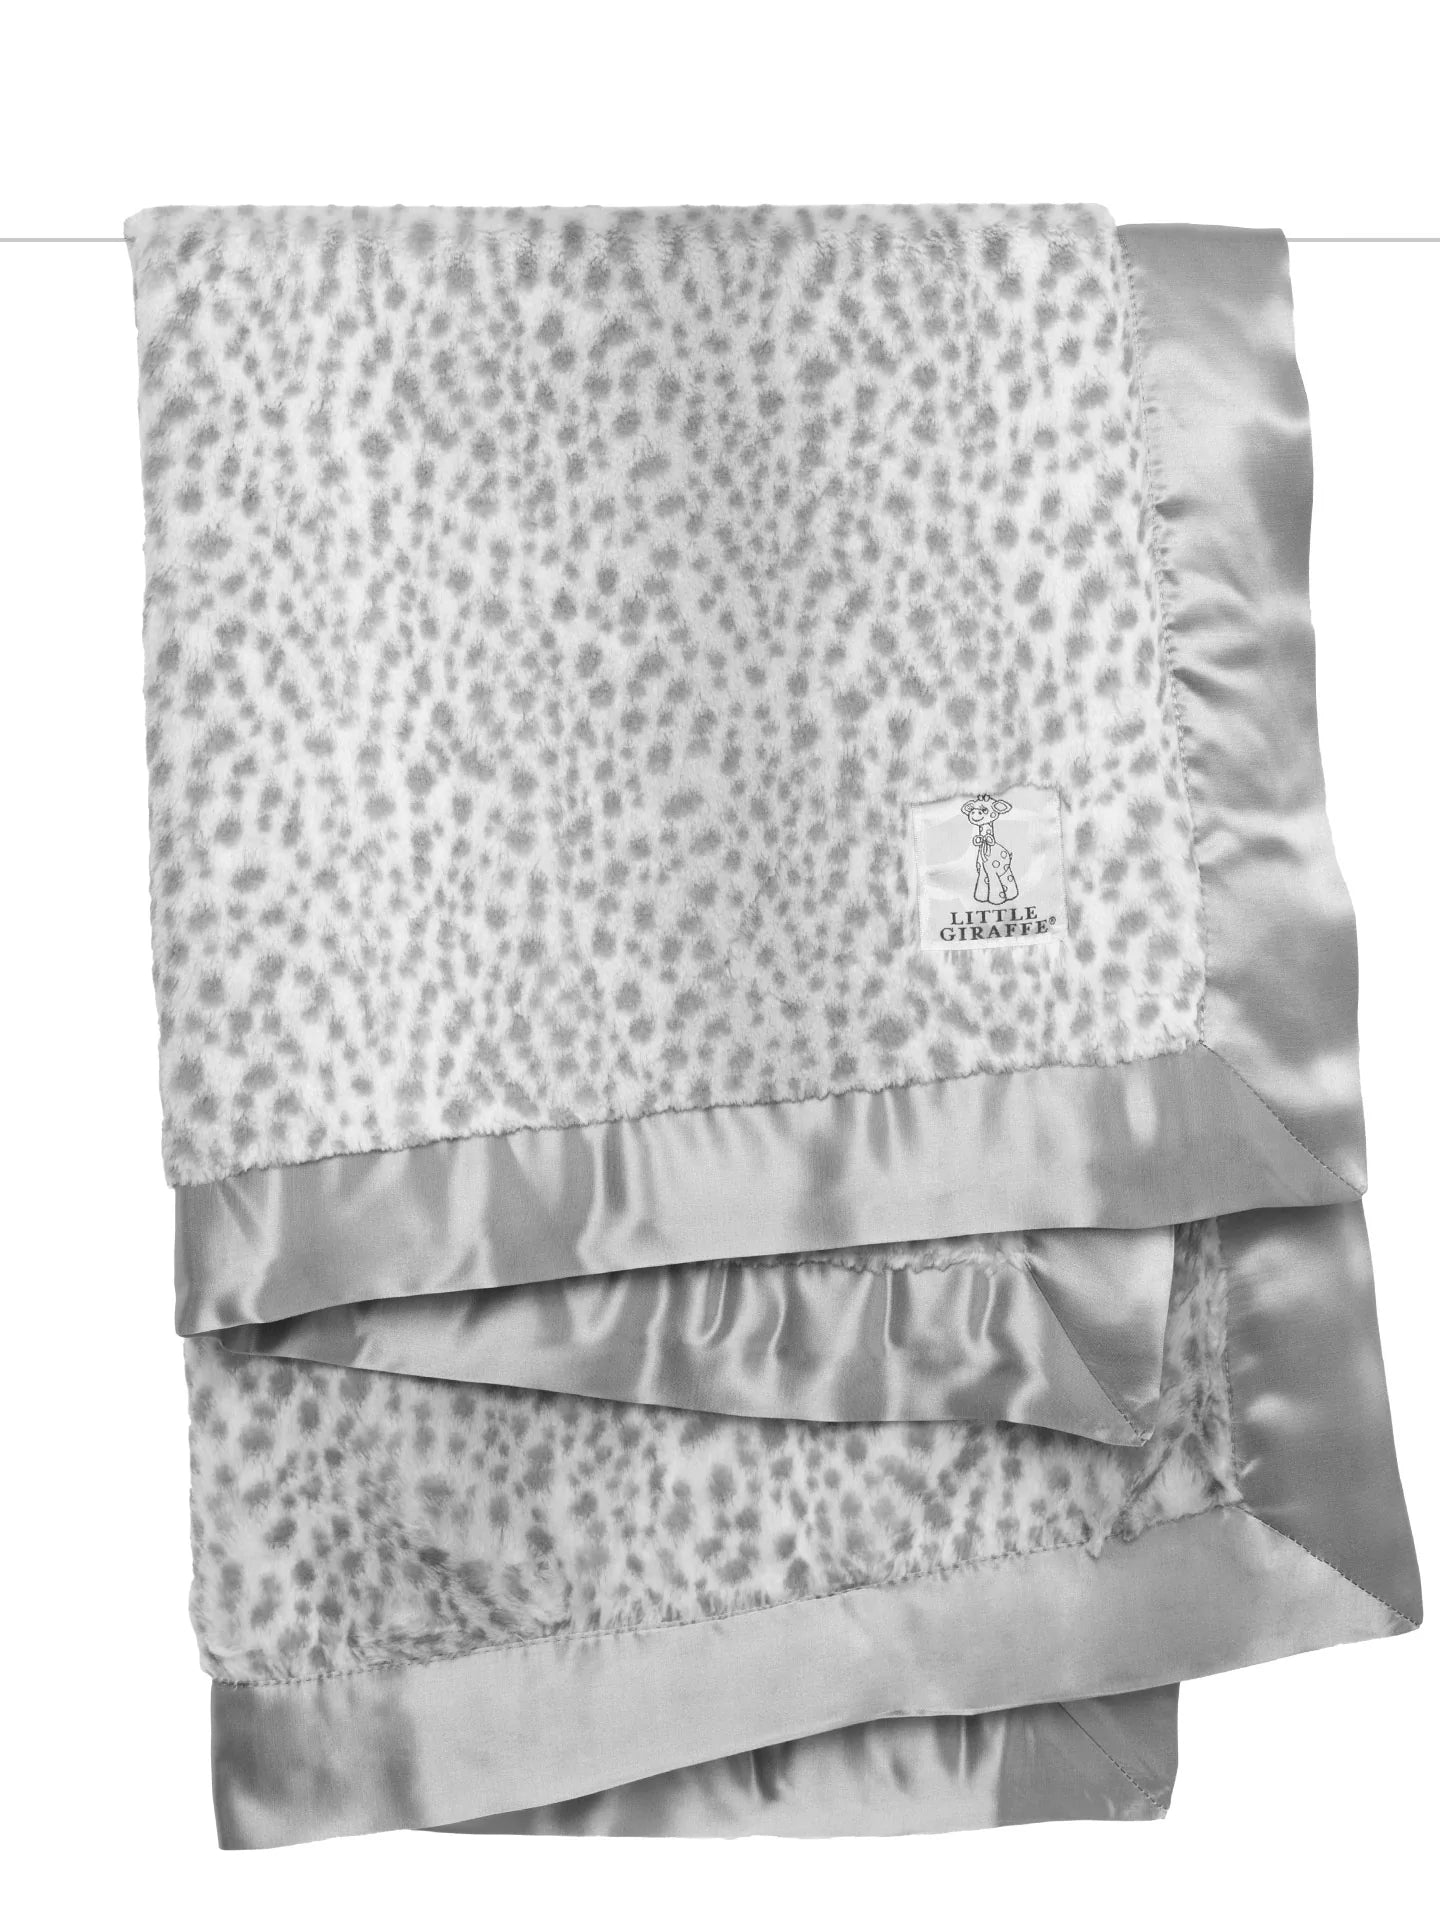 Luxe Snow Leopard Blanket, Silver - Magpies Paducah